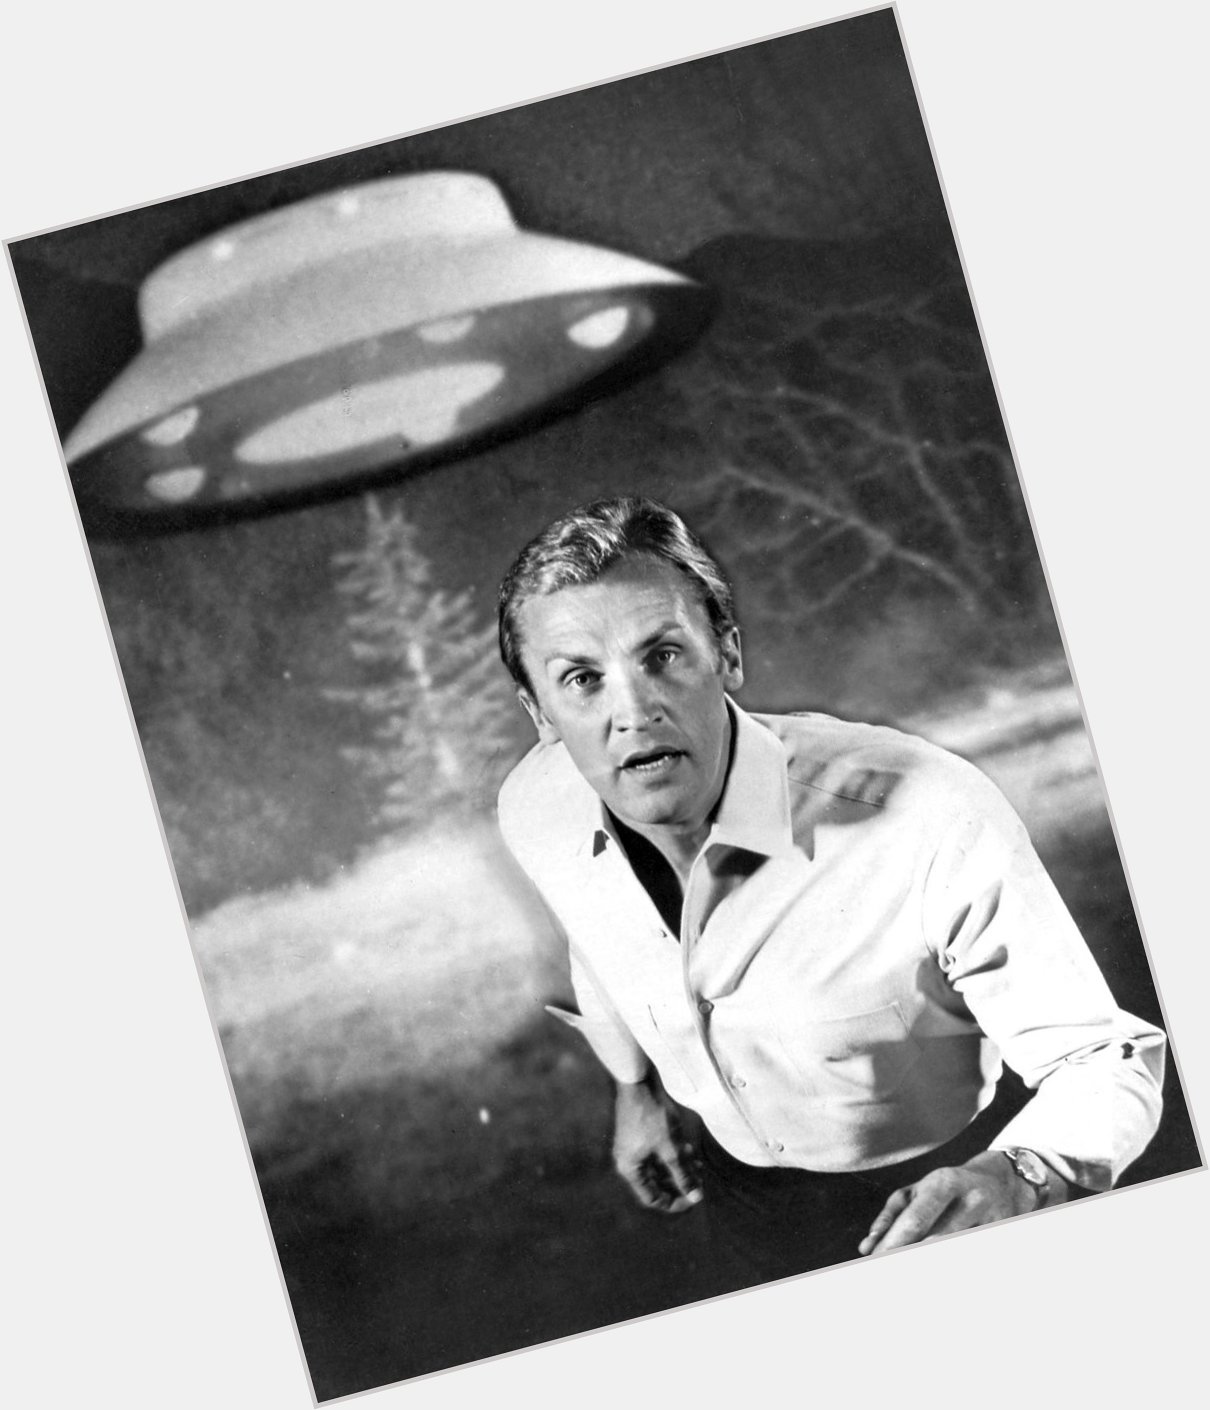 Wishing a happy birthday to The Invaders star Roy Thinnes 